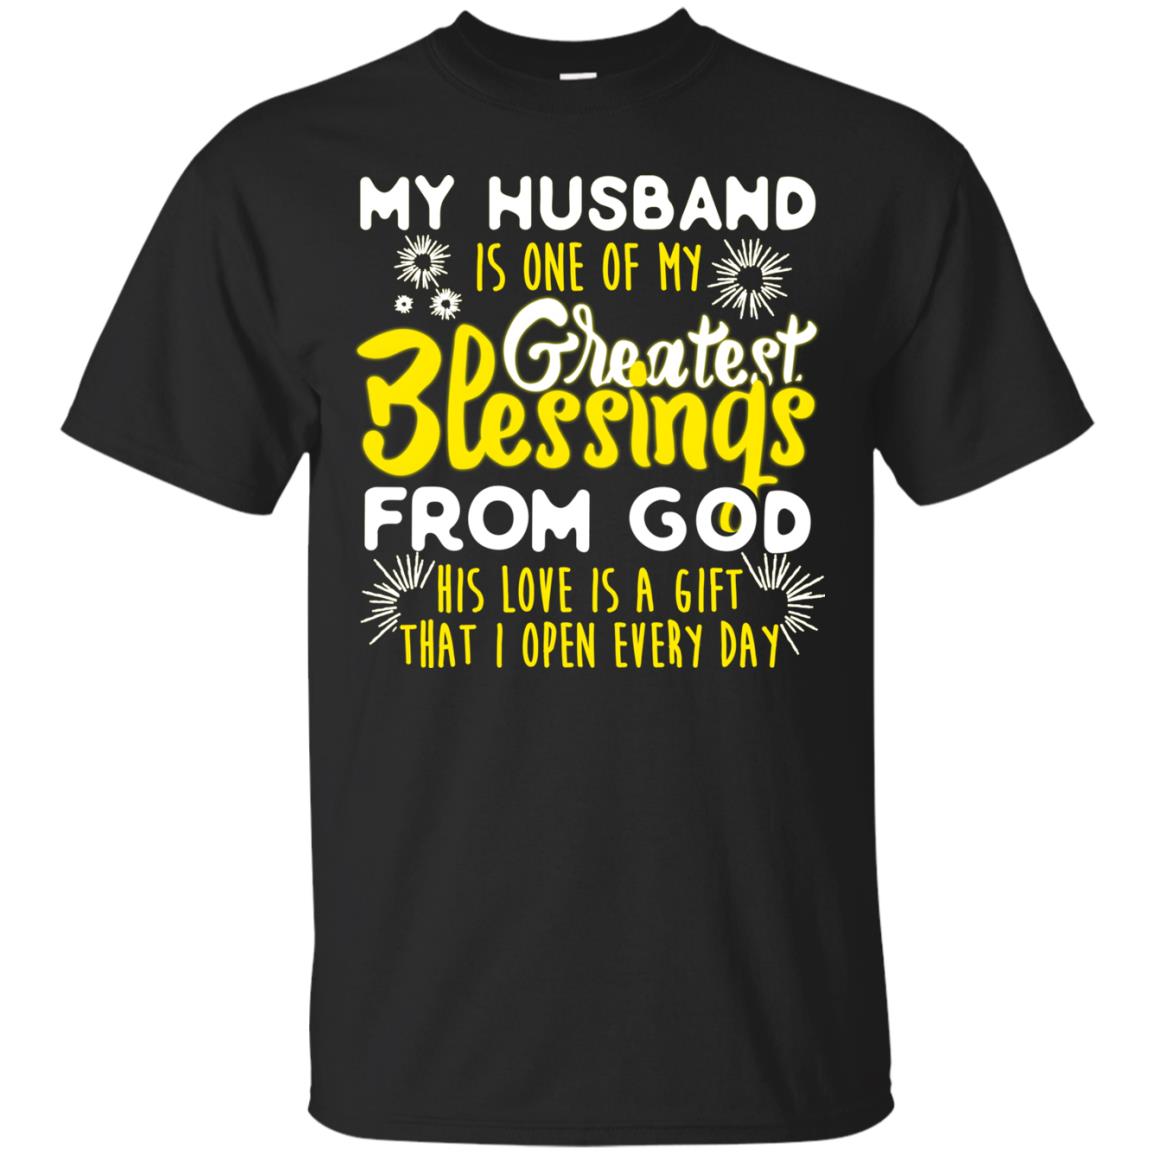 My Husband Is One Of My Greatest Blessings From God His Love Is A Gift That I Open Every Day Shirt For WifeG200 Gildan Ultra Cotton T-Shirt